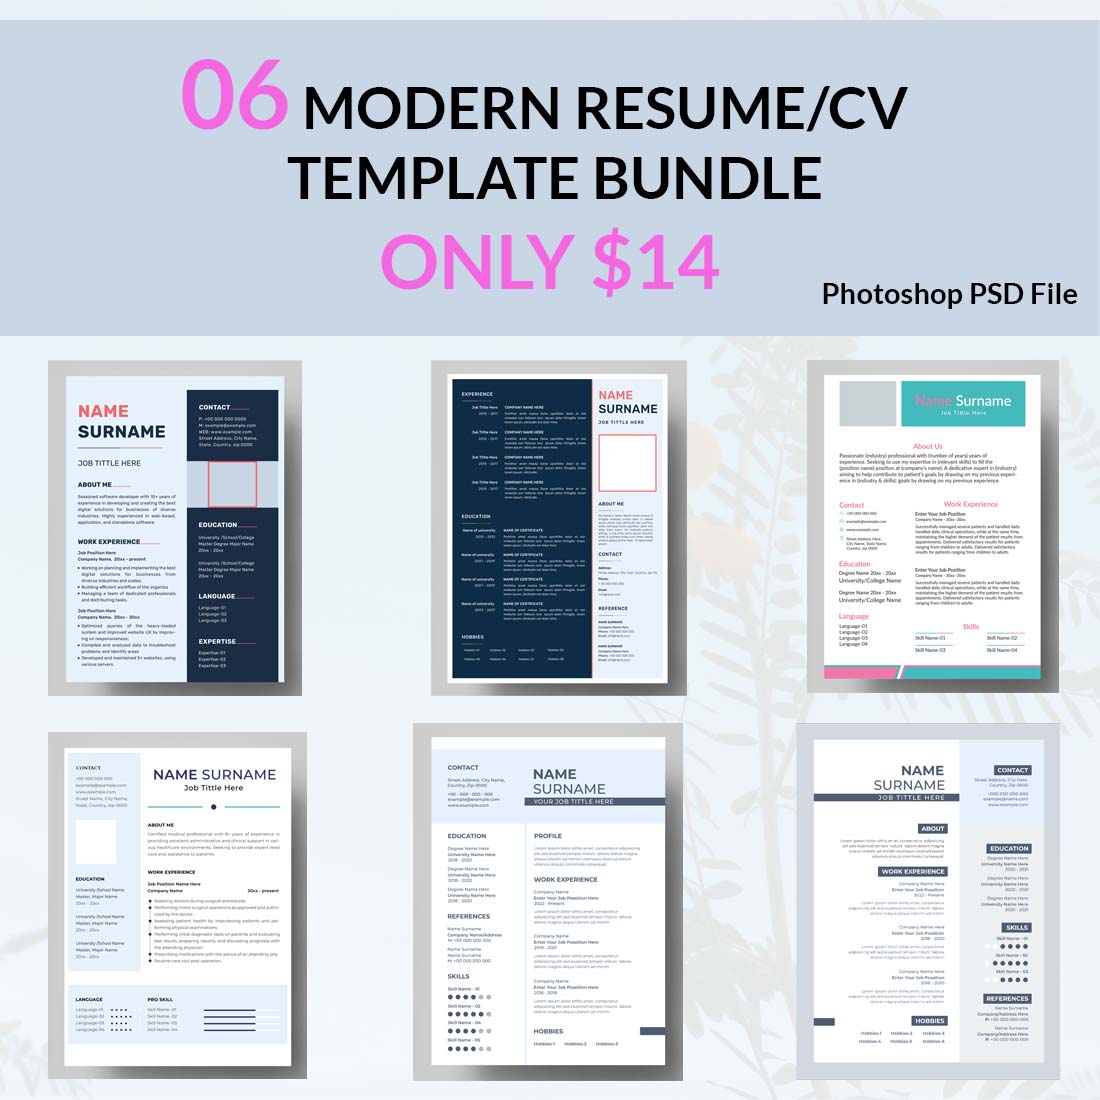 The modern resume / cv template bundle is available for only $ 14.